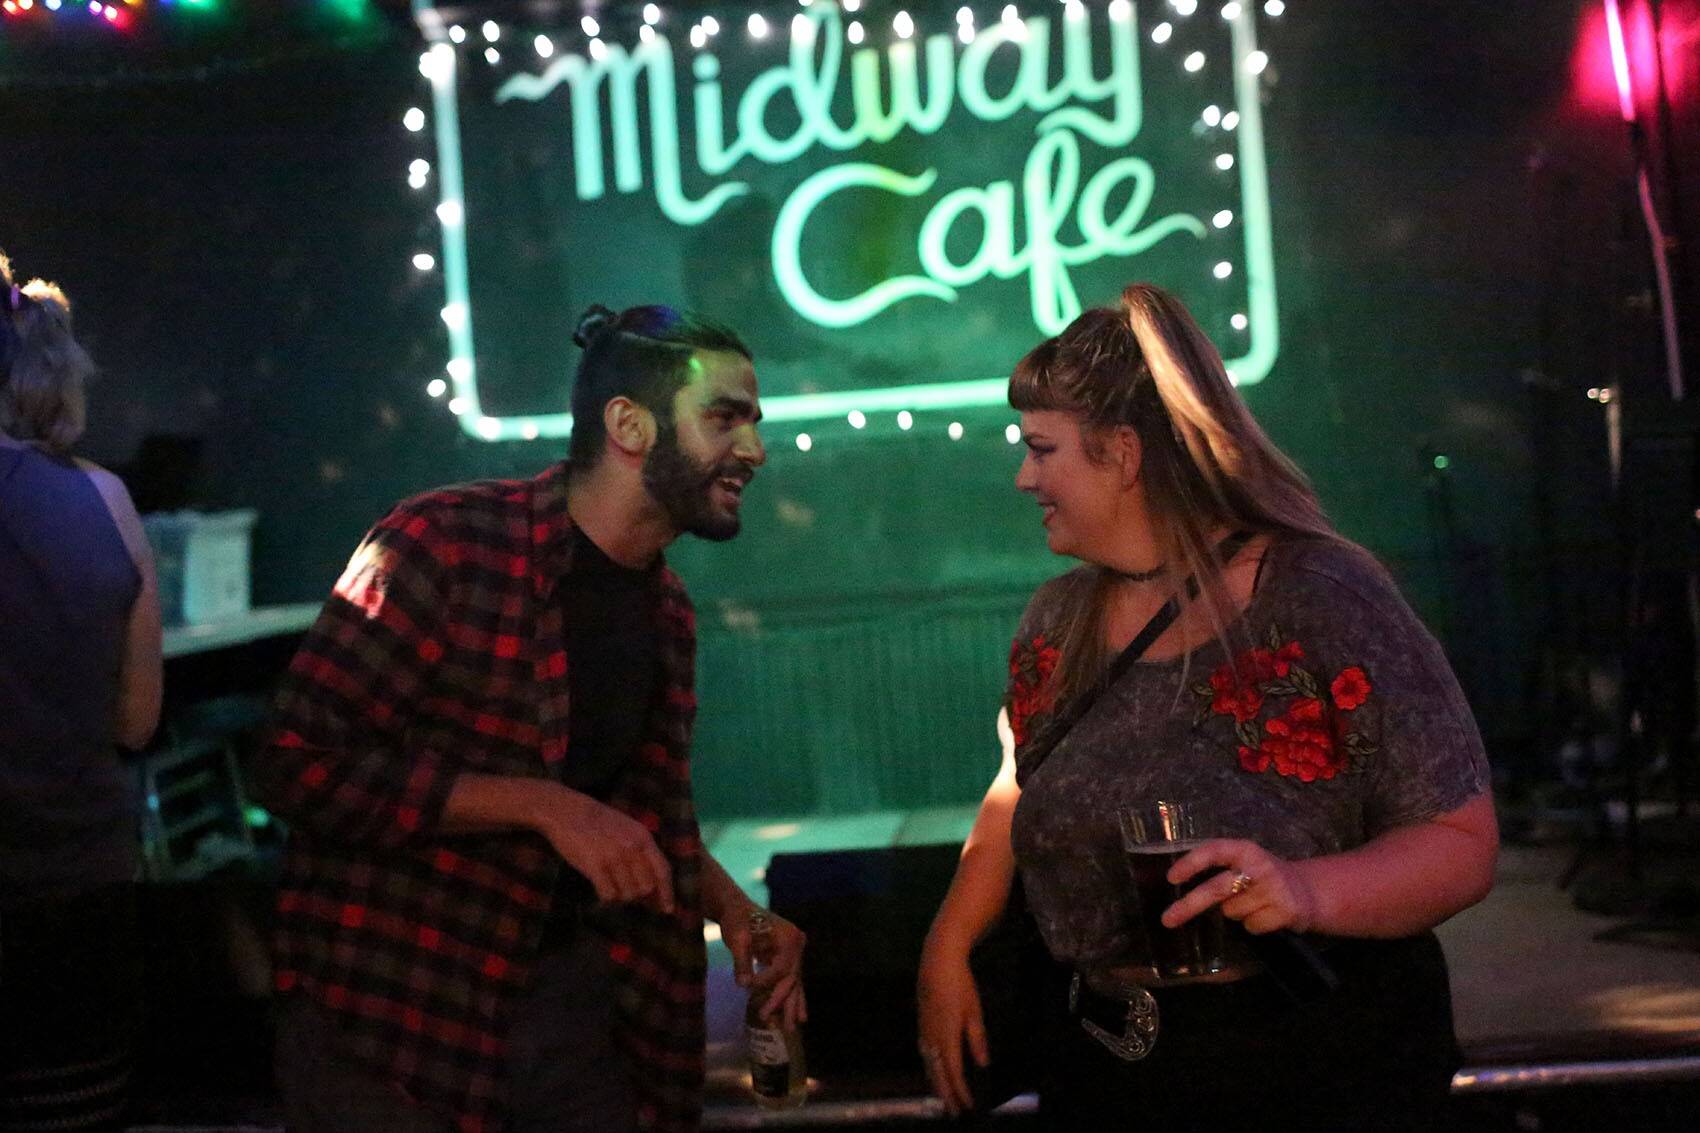 Kristie Macewen and Anthony Fusco dance at Midway Cafe in Jamaica Plain on a Thursday night in 2017. (Hadley Green for WBUR)